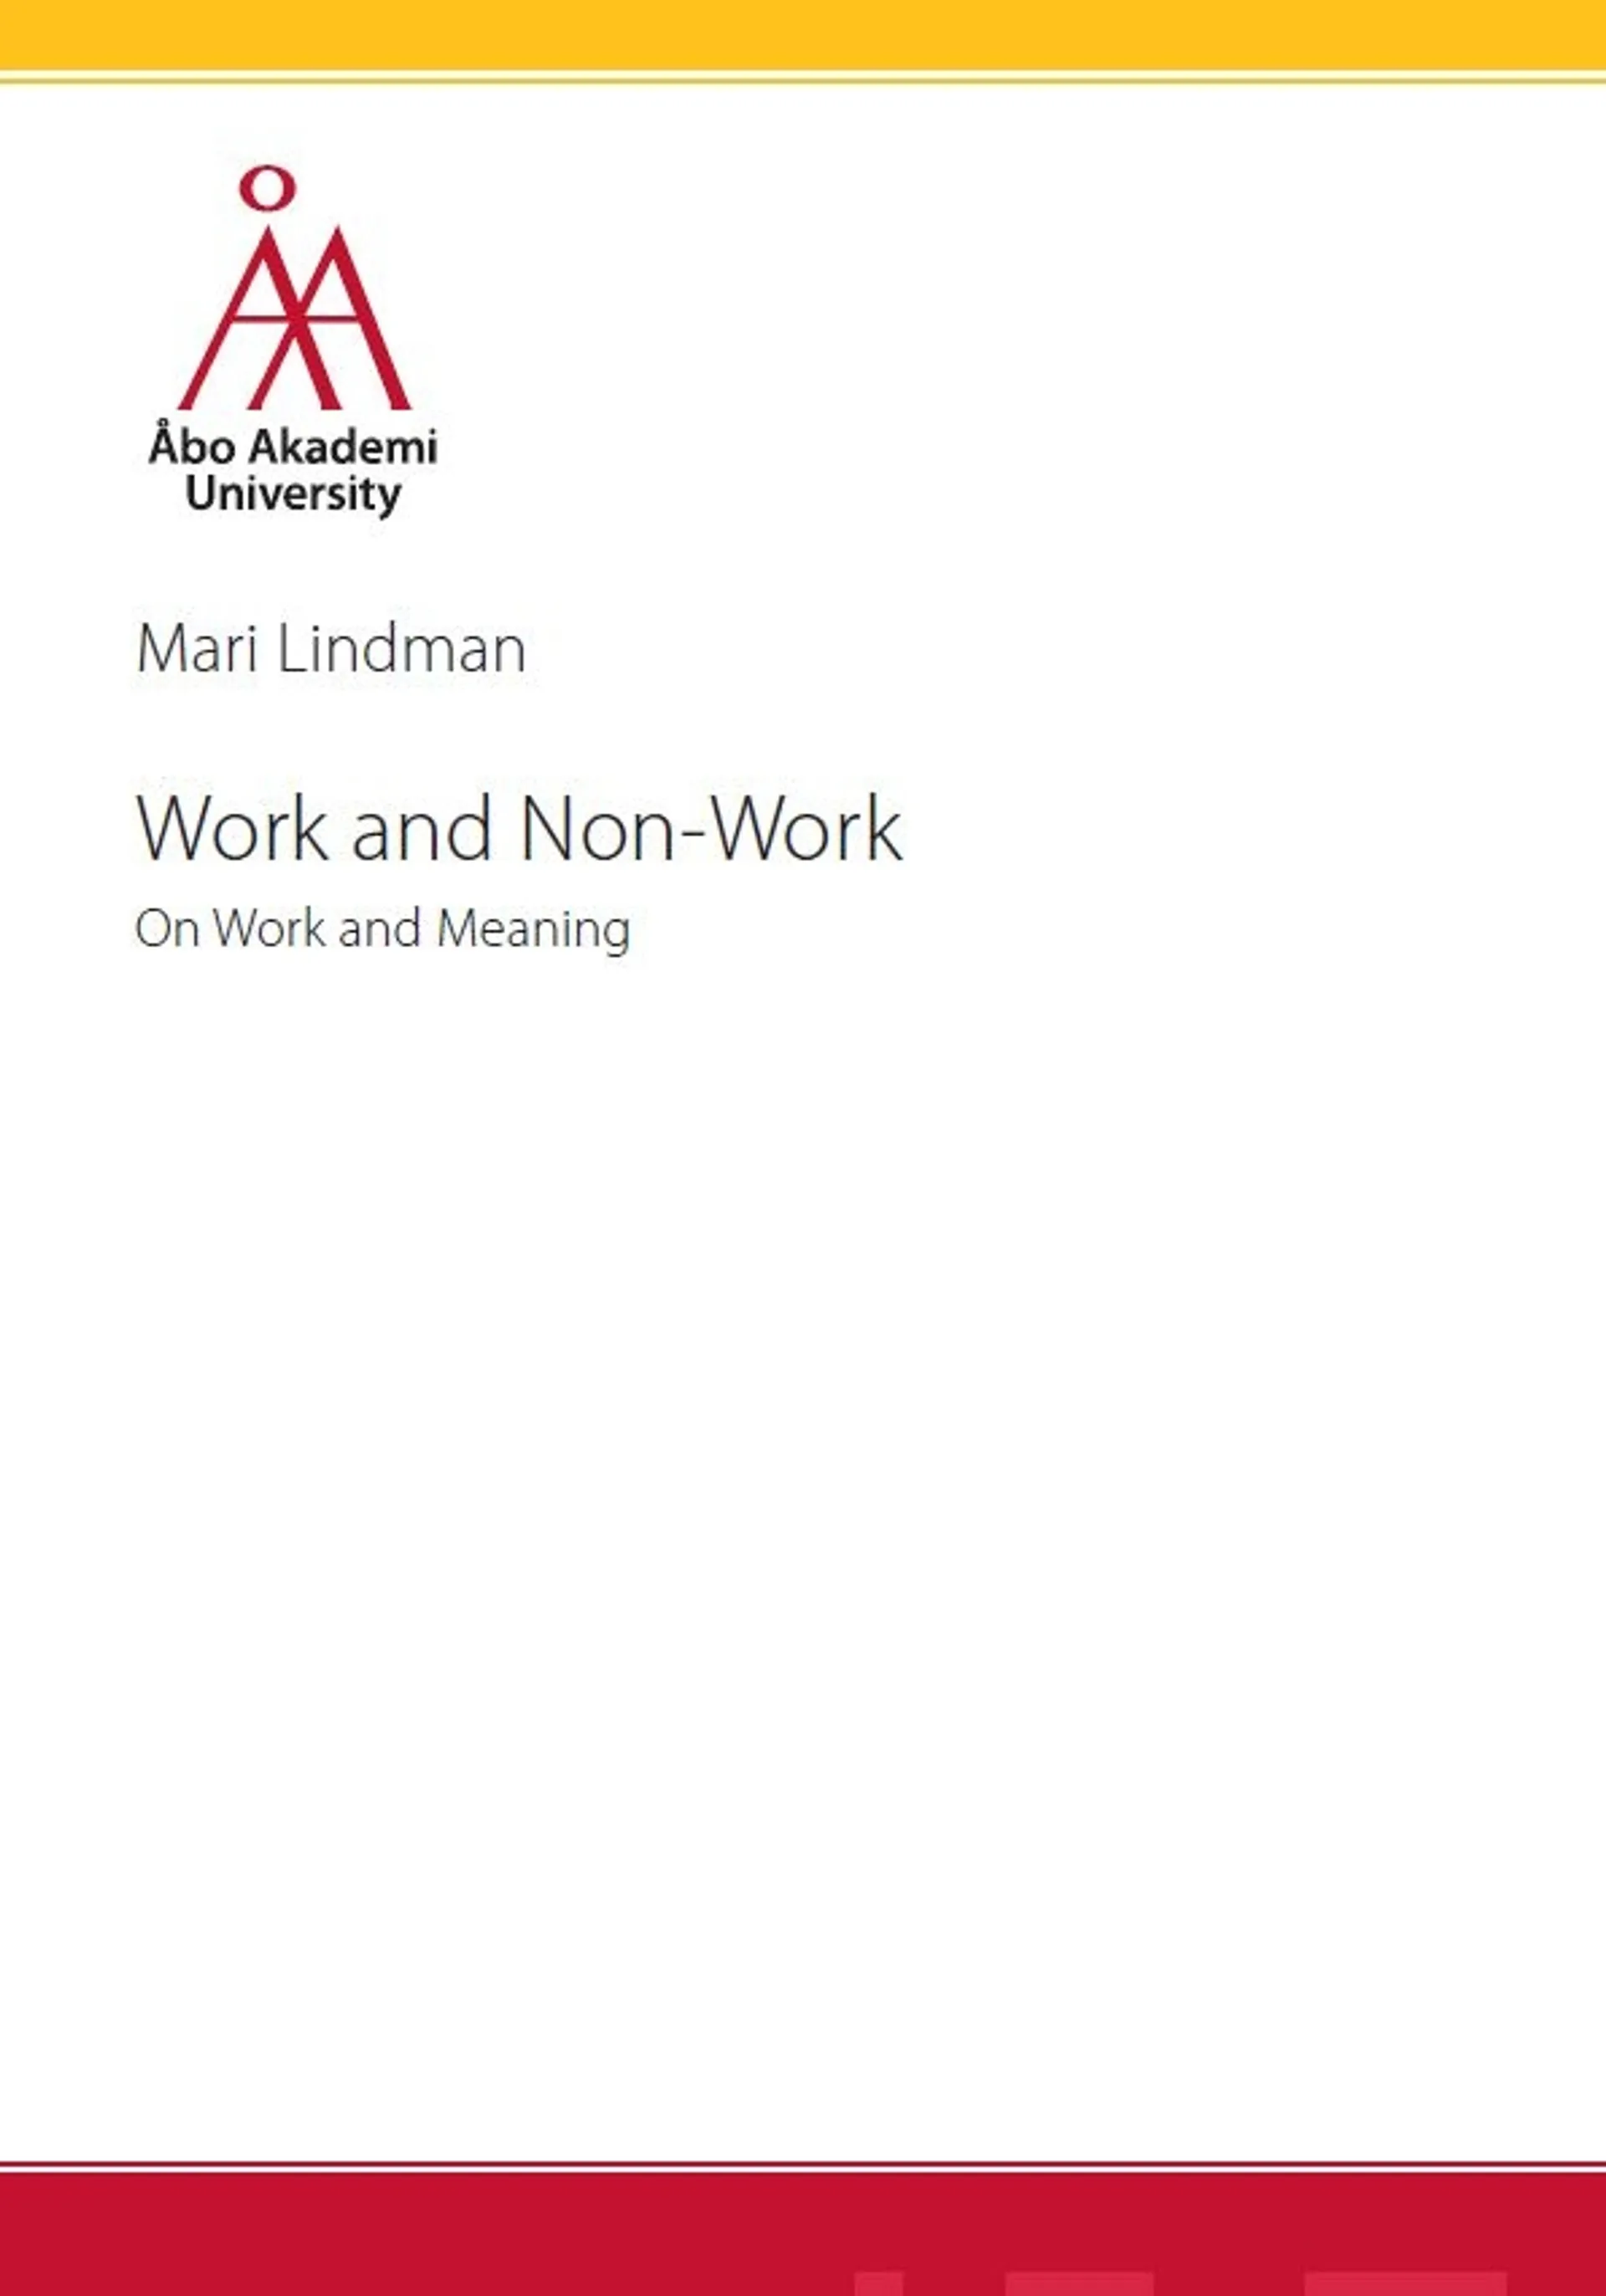 Lindman, Work and Non-Work